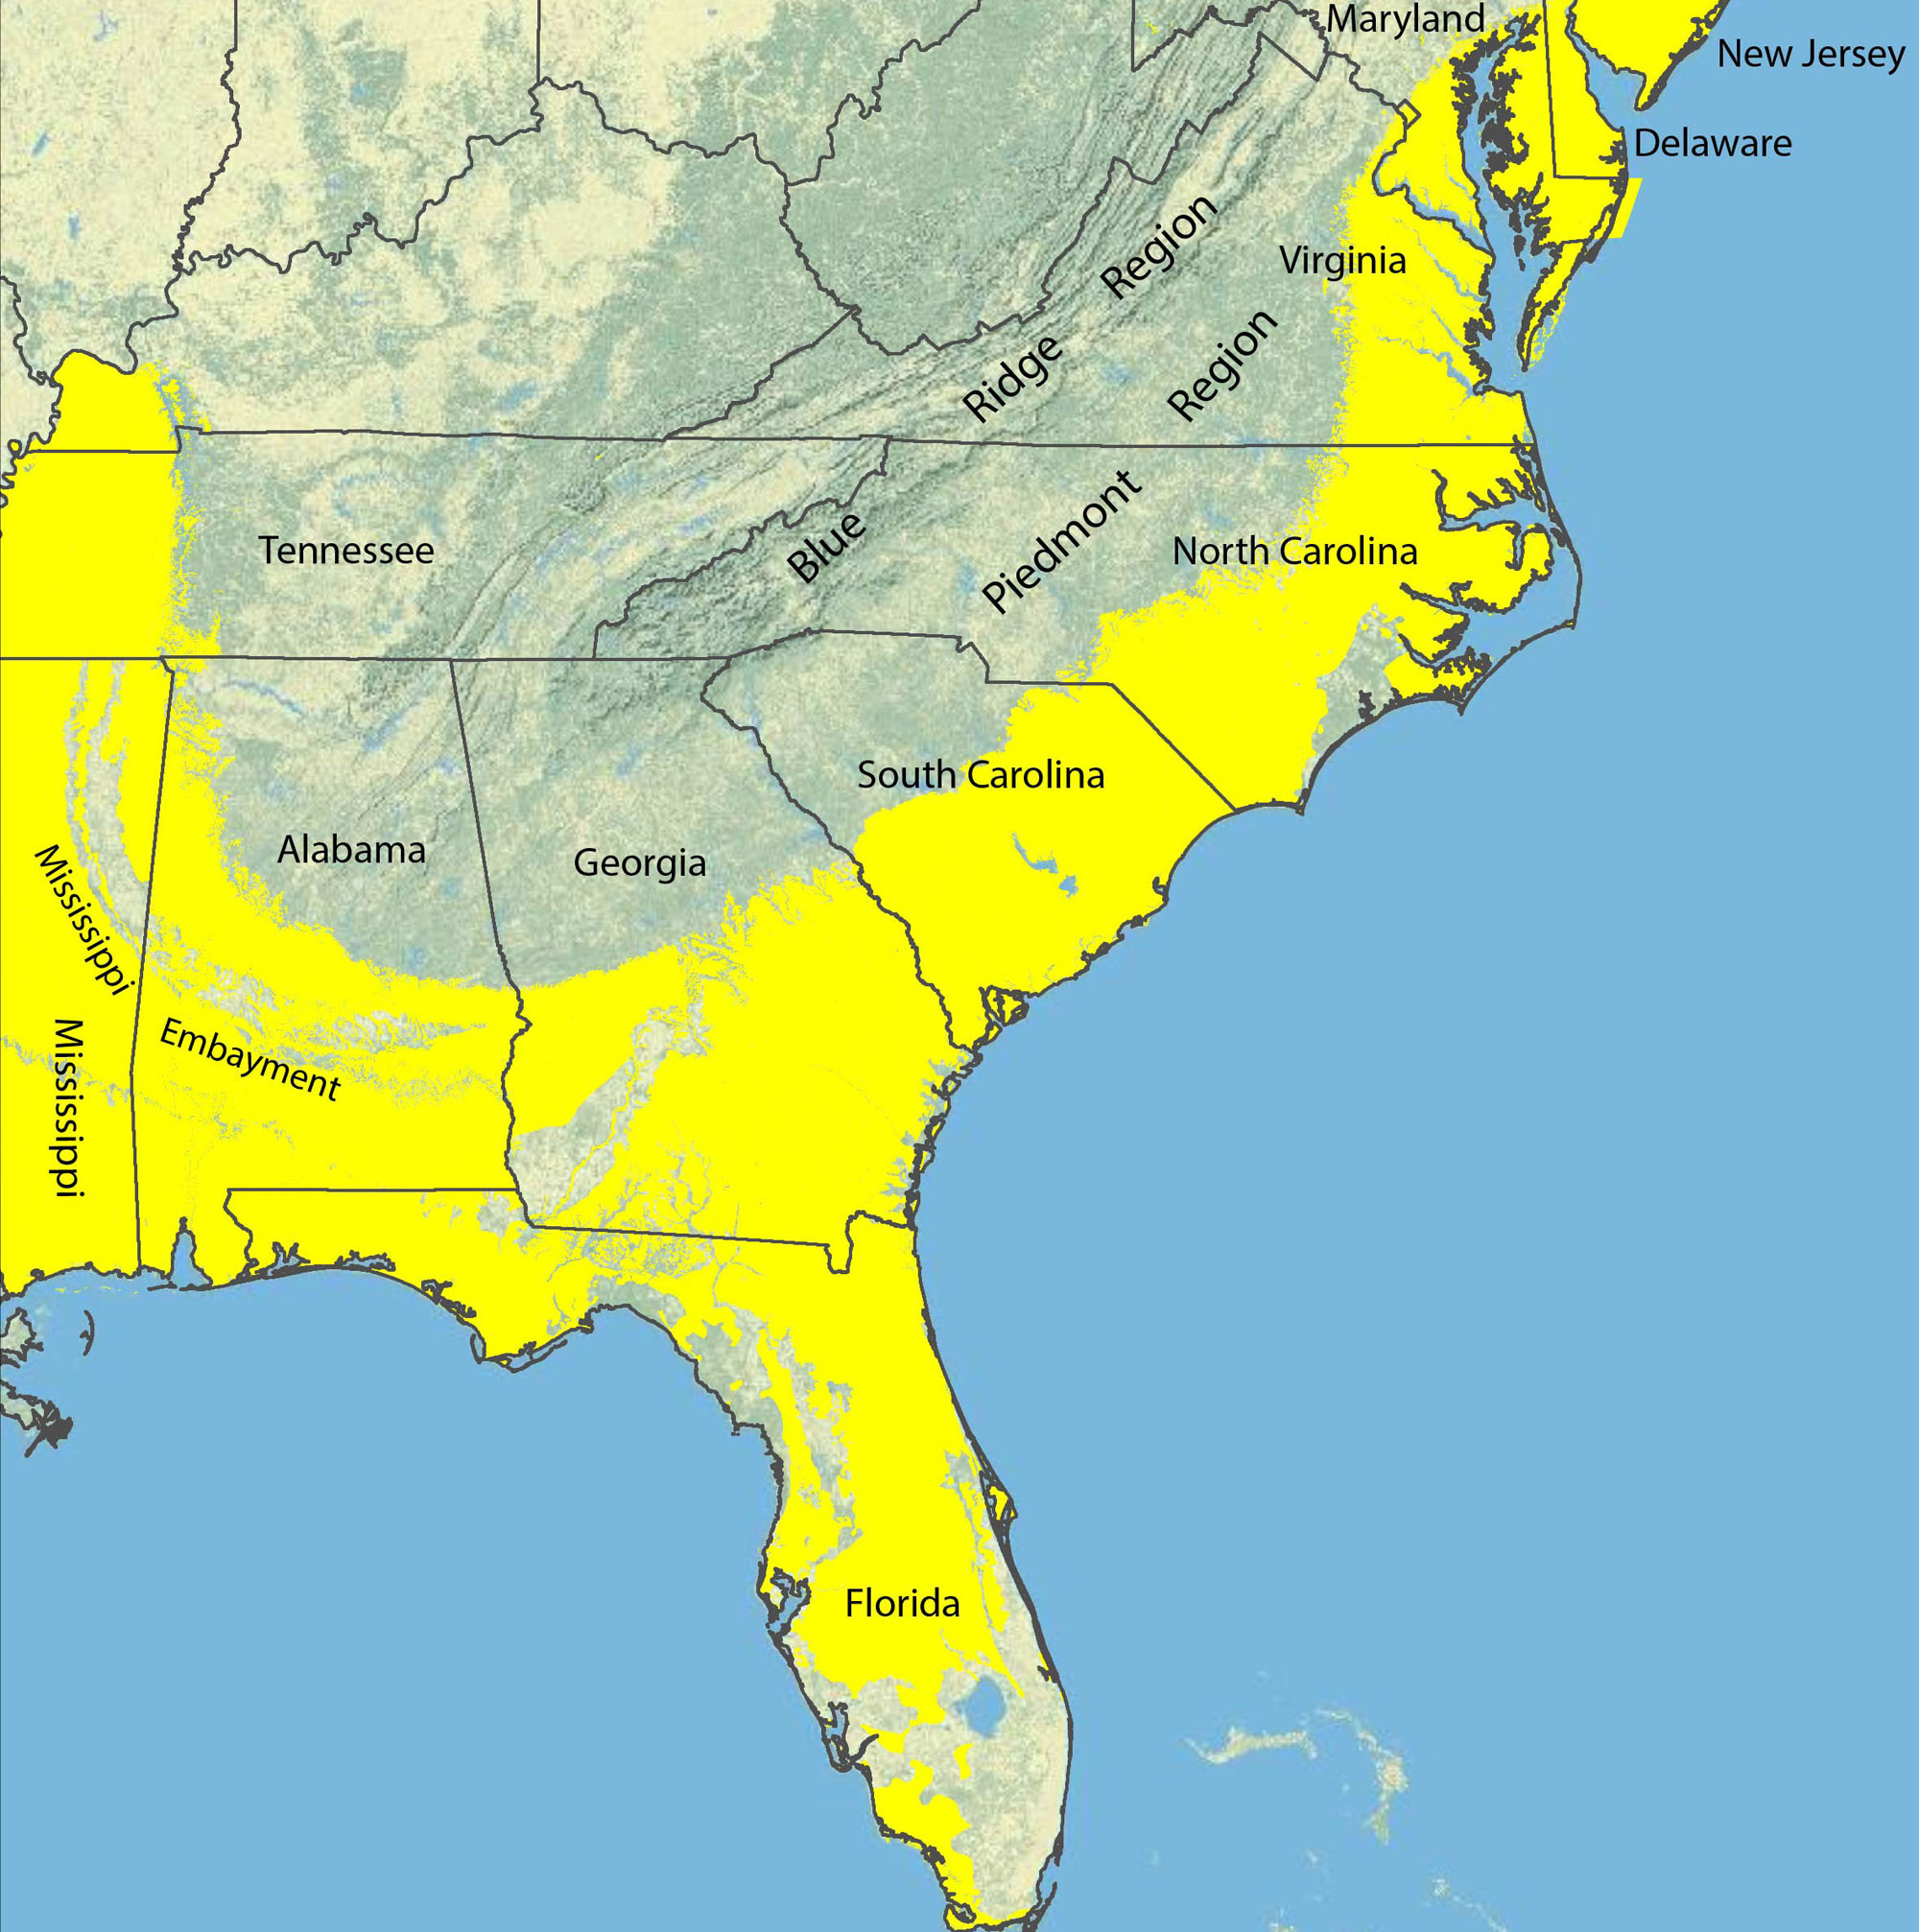 Map showing most of the southeastern United States with Coastal Plain sedimentary deposits indicated in yellow.